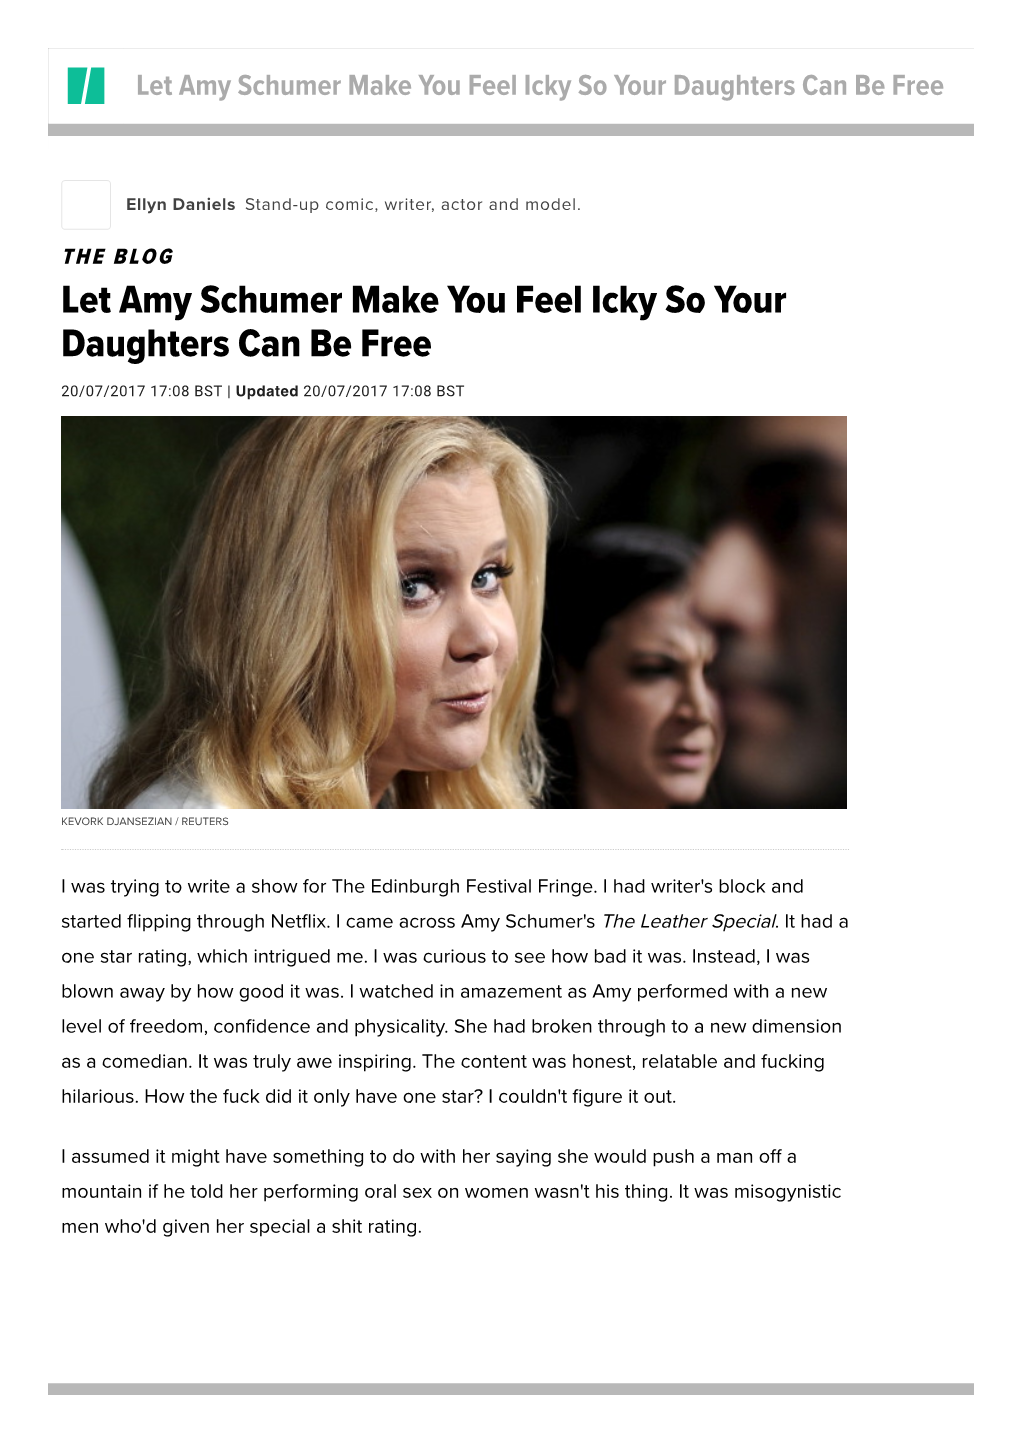 Let Amy Schumer Make You Feel Icky So Your Daughters Can Be Free